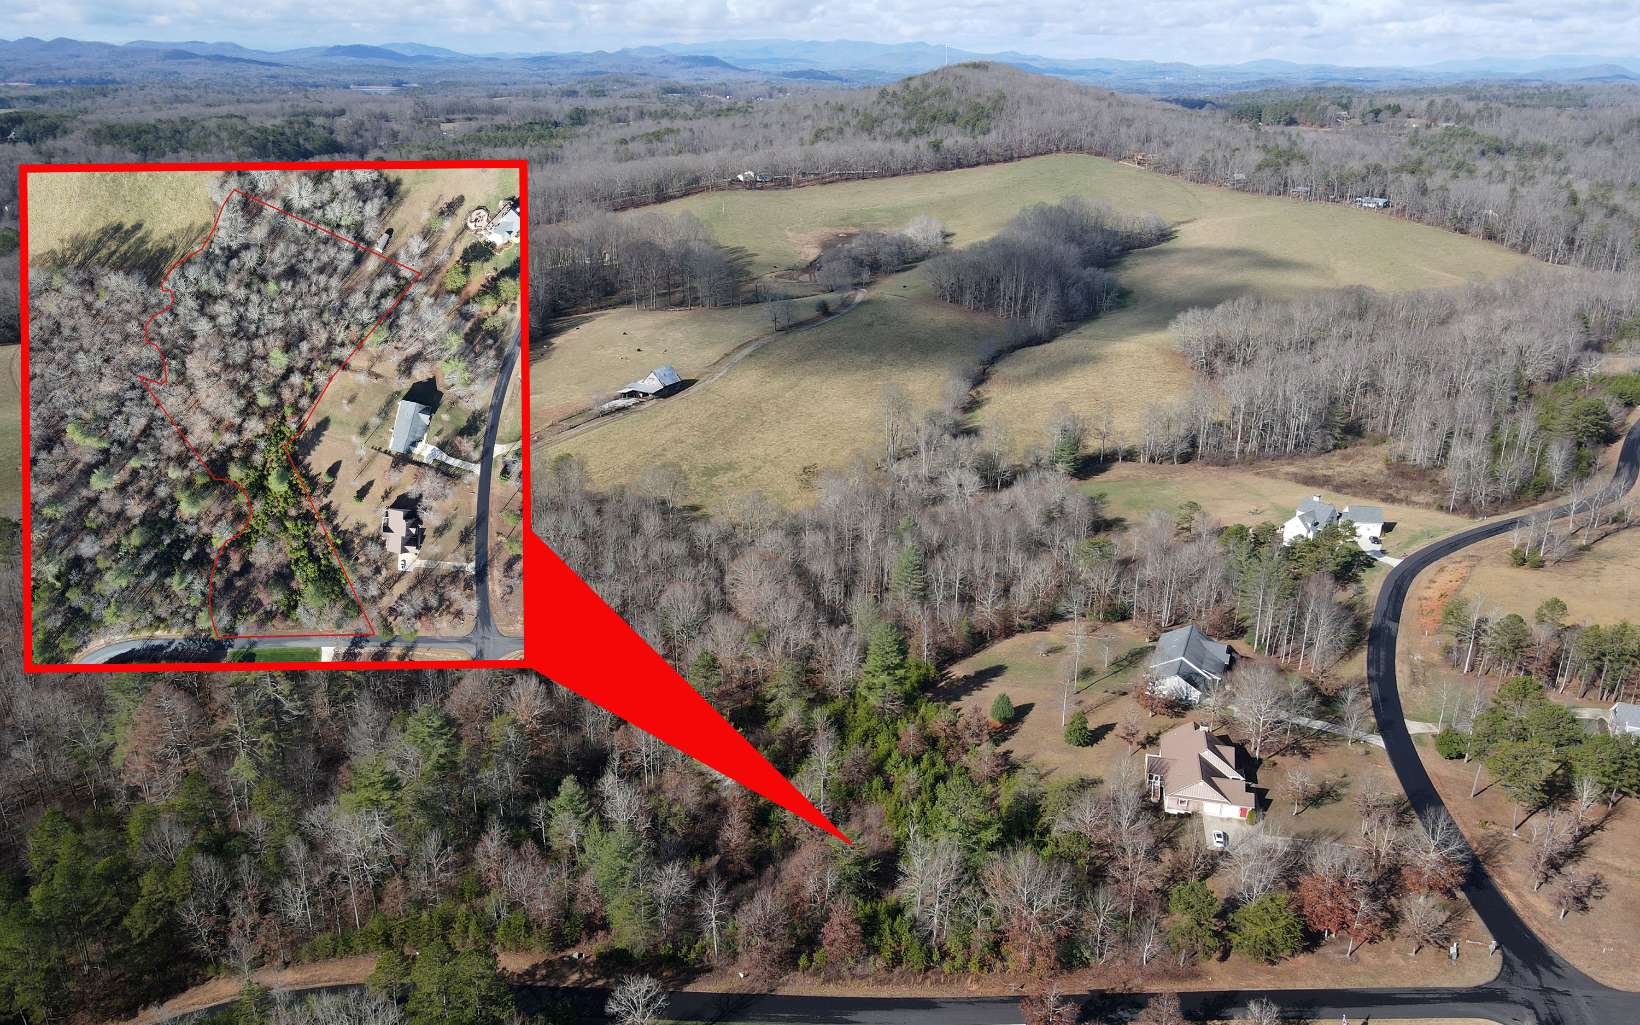 AMAZING 3.74 Acre Lot in the prestige Owen Glen Golf Community! Gentle laying with a branch on the edge of the lot! Bring your builder and build your mountain home! All paved roads and underground utilities. Amenities include Gated Entrance, Community Clubhouse great for entertaining with swimming pool and tennis courts. Just minutes from downtown Blairsville. Call me today!